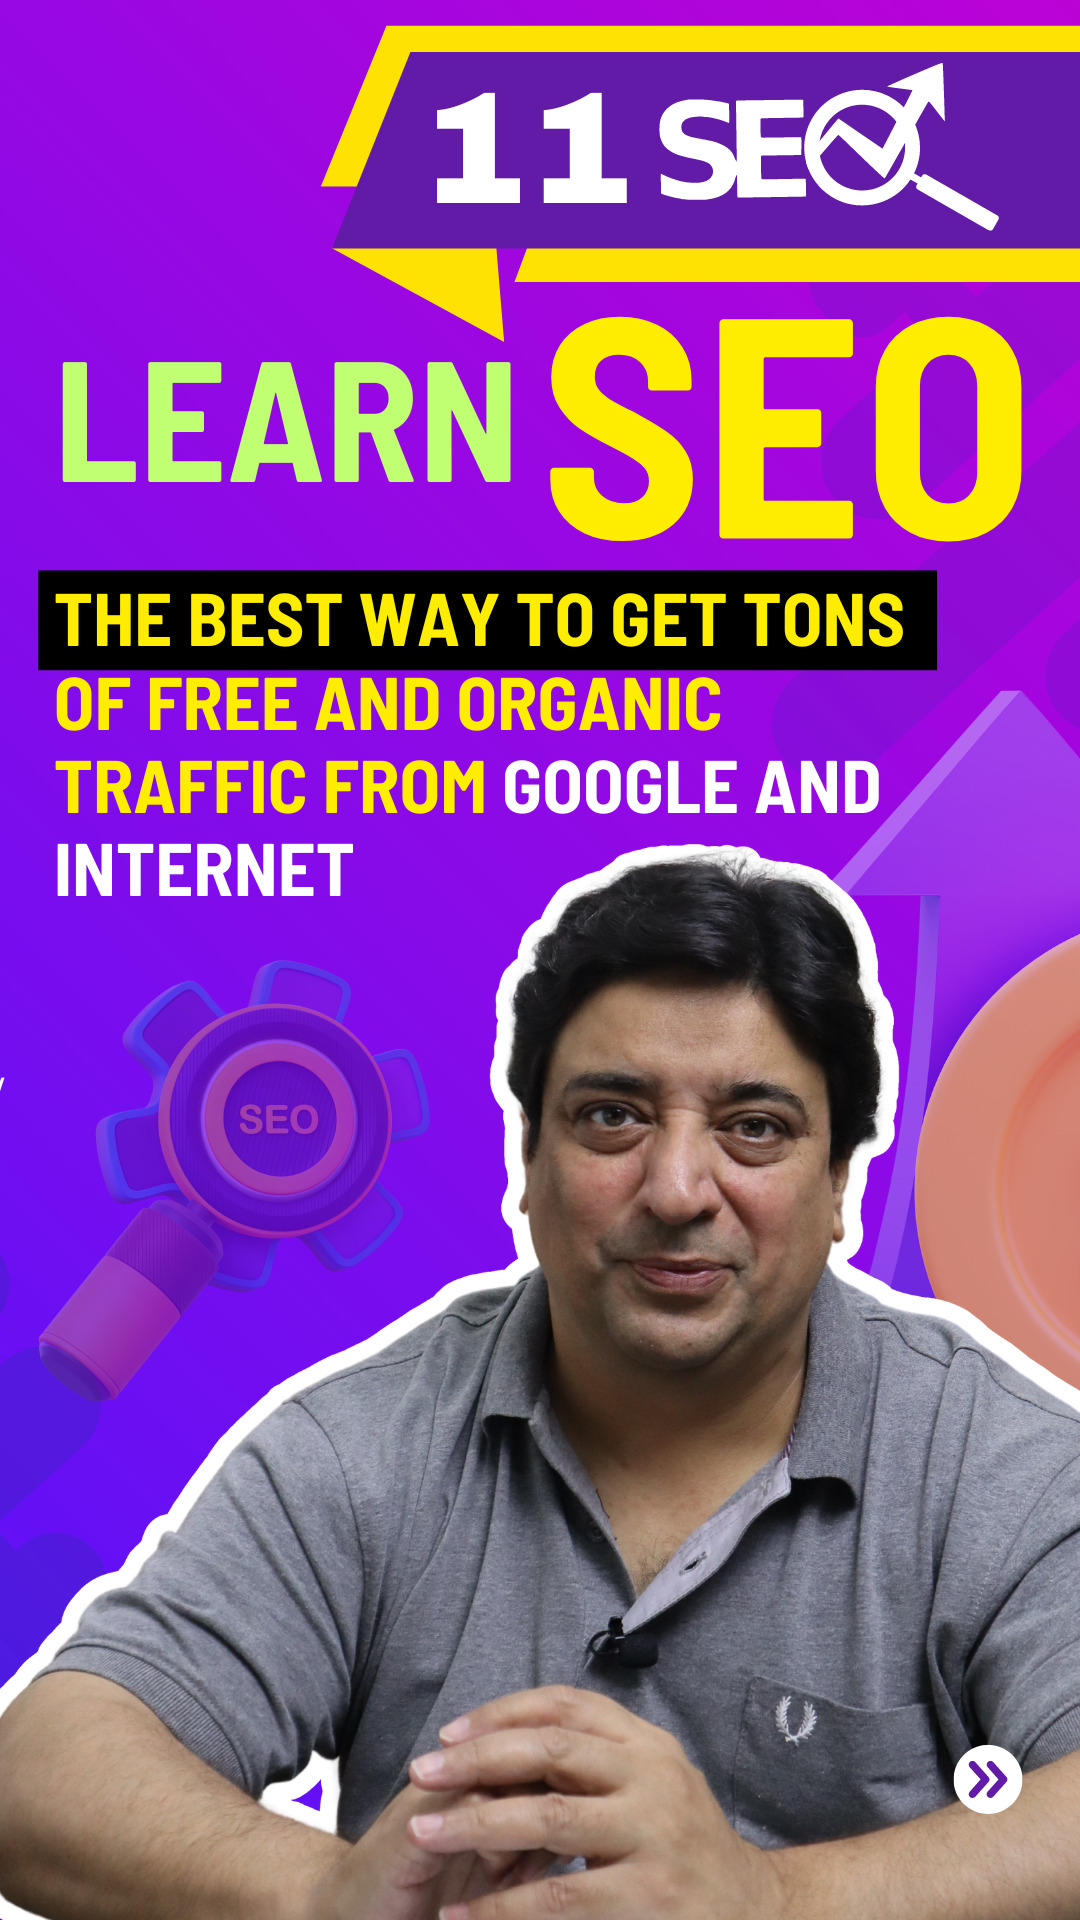 The most effective strategy for obtaining tons of organic, free traffic from Google and the internet